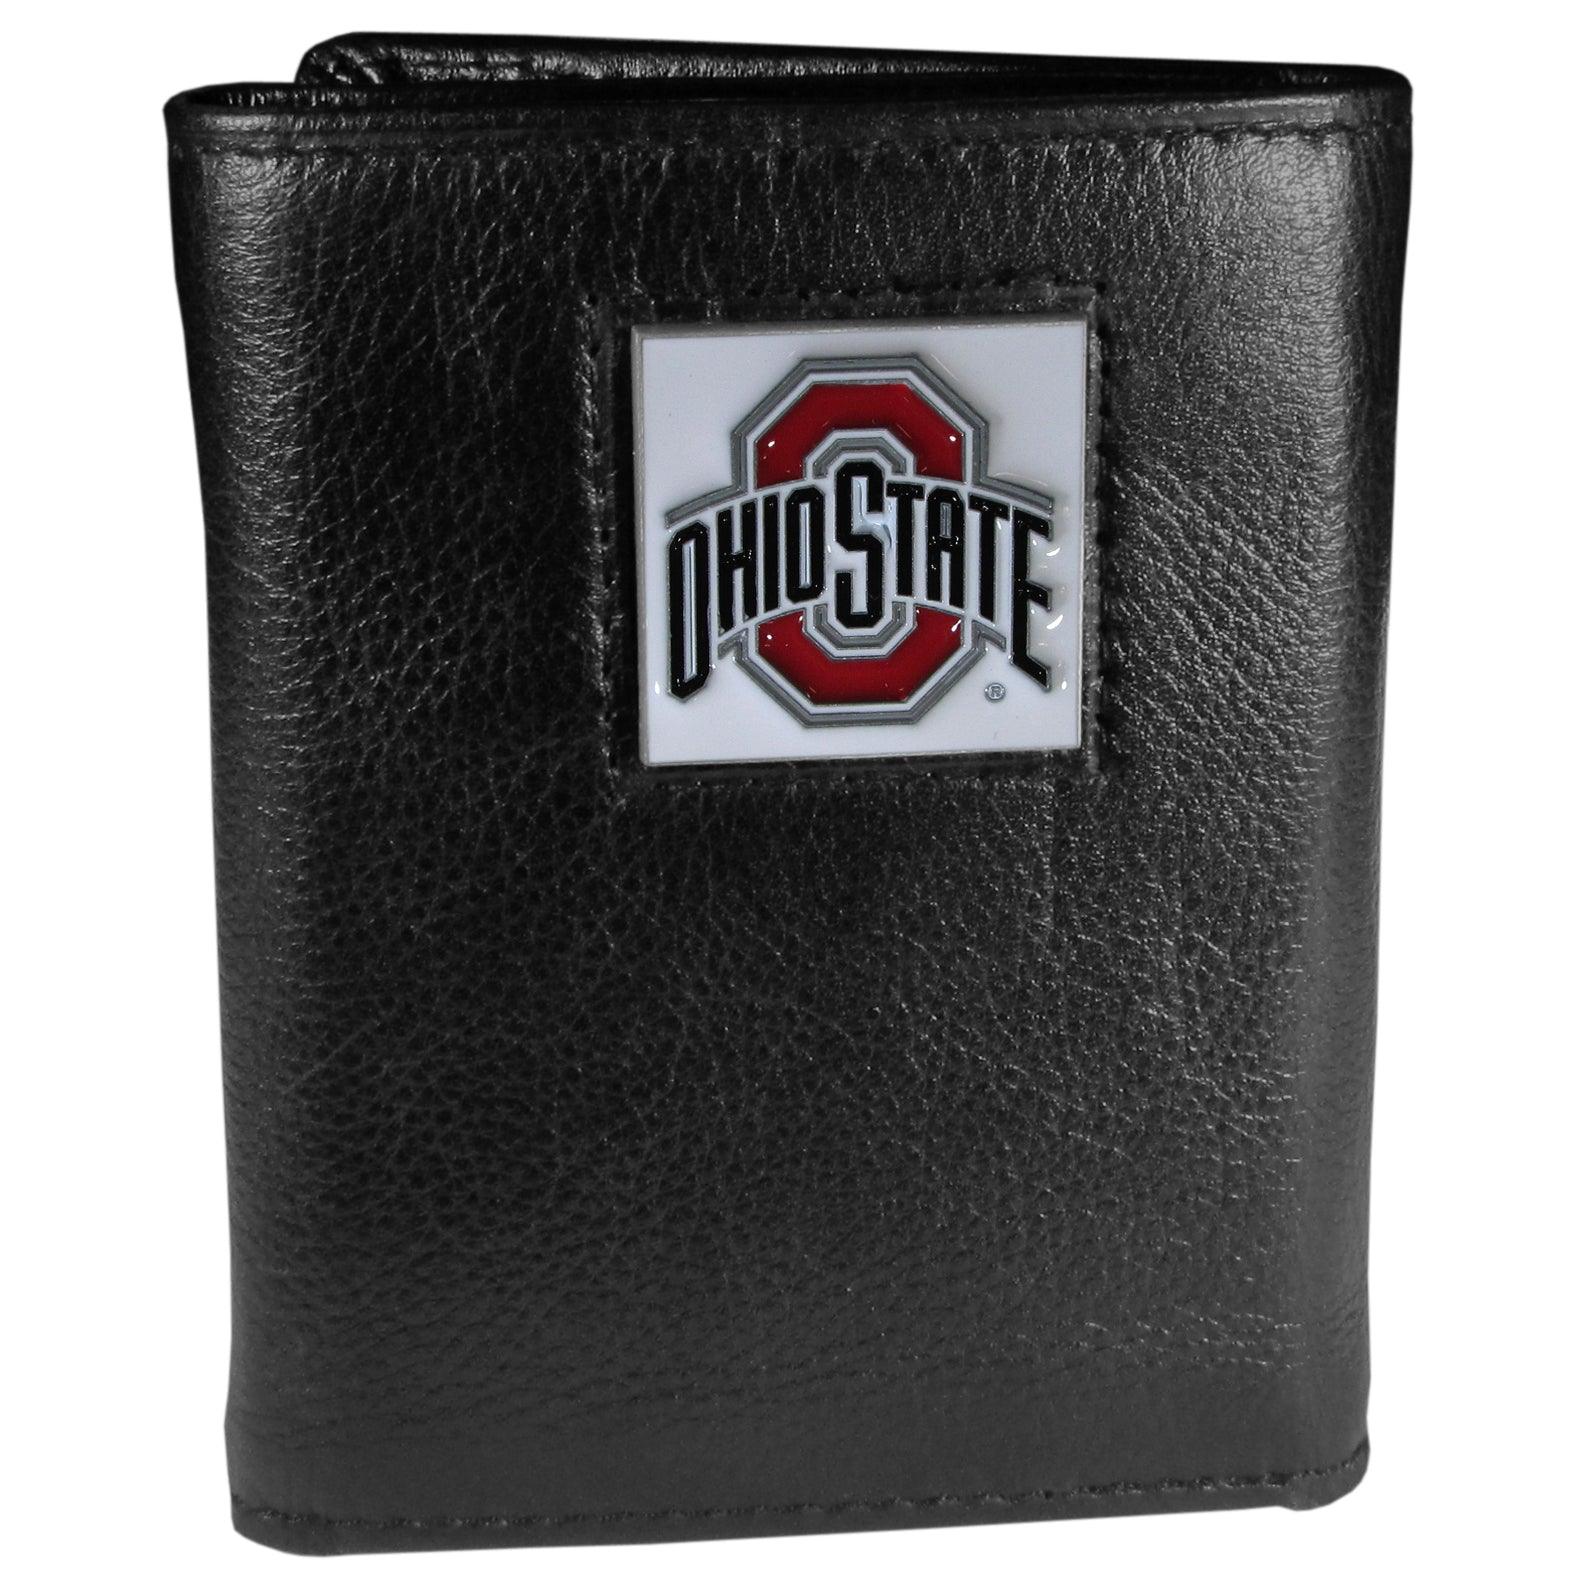 Ohio St. Buckeyes Deluxe Leather Tri-fold Wallet Packaged in Gift Box - Flyclothing LLC